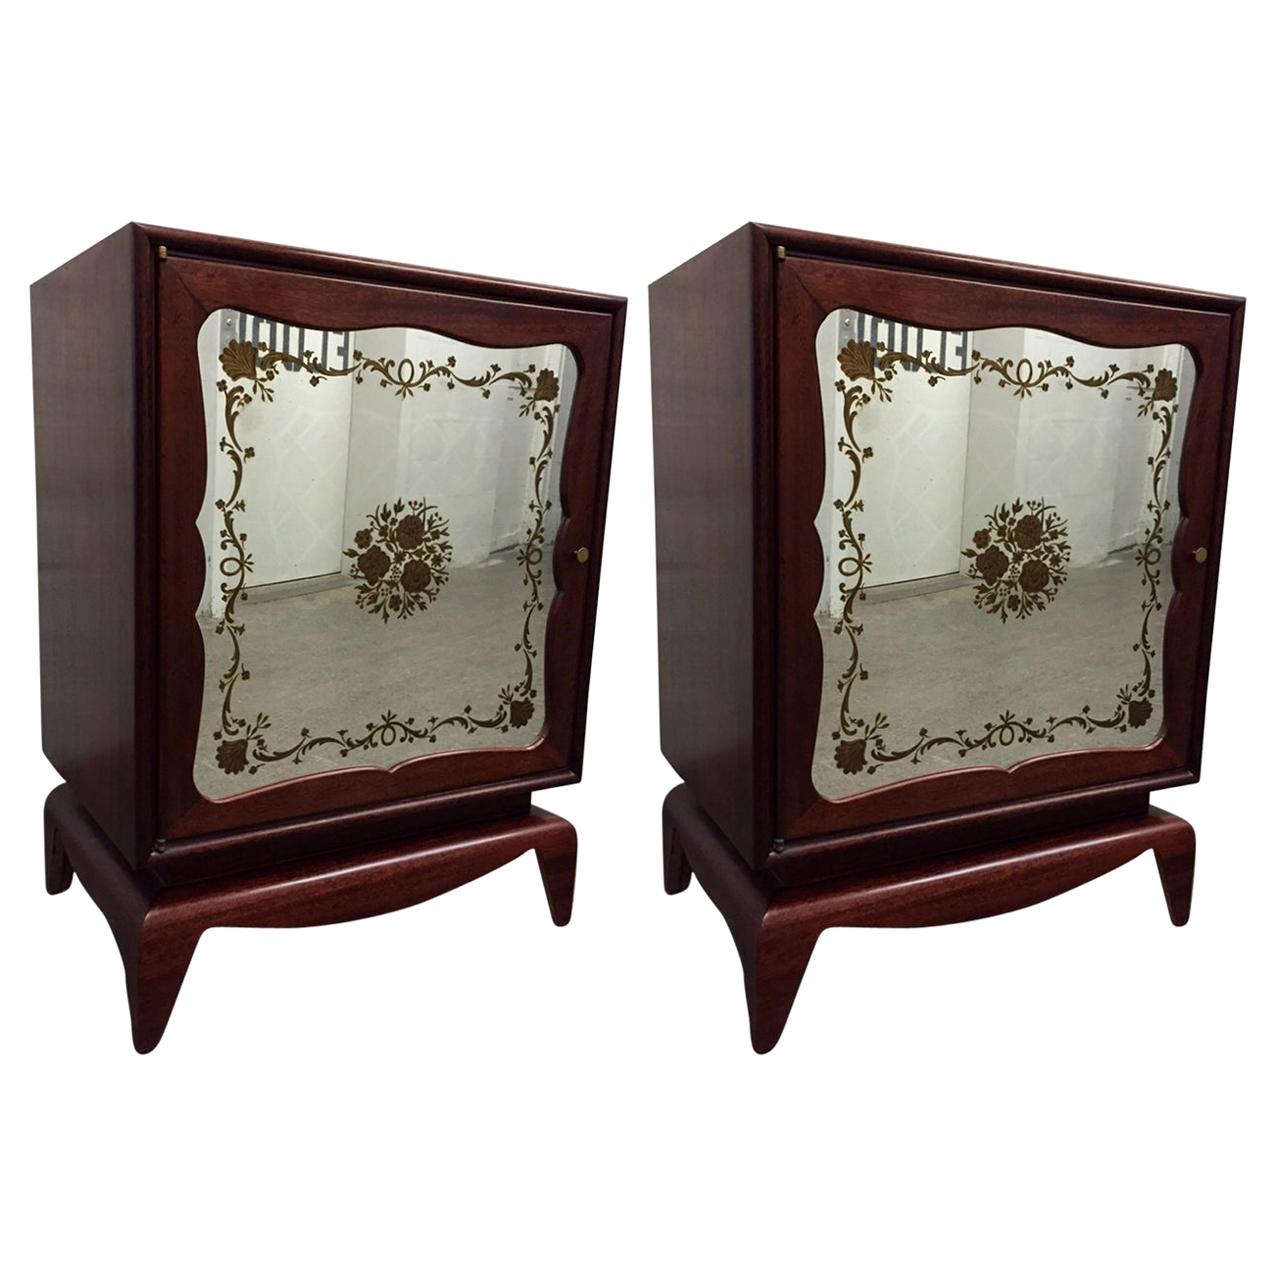 Pair of Mahogany Grosfeld House Cabinets with Etched Mirrored Panels For Sale